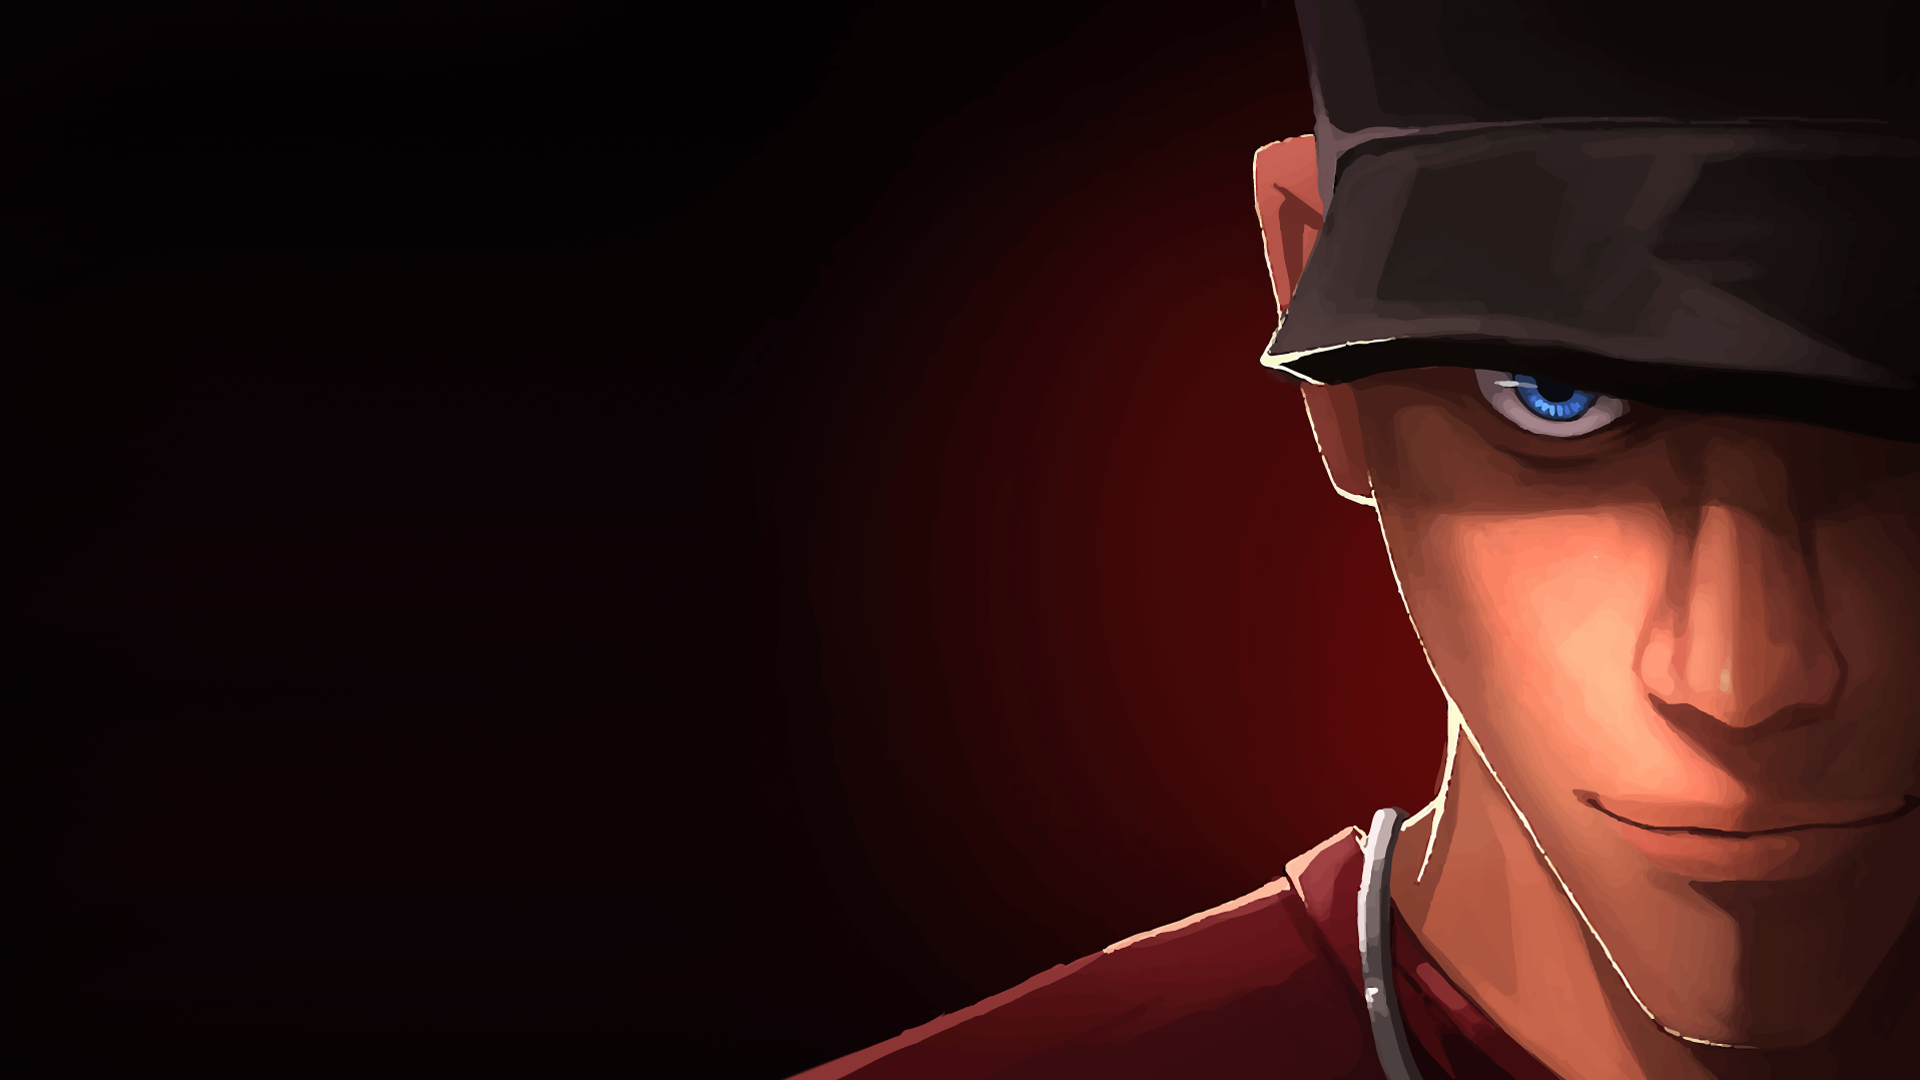 Tf2 Scout Wallpapers - Wallpaper Cave